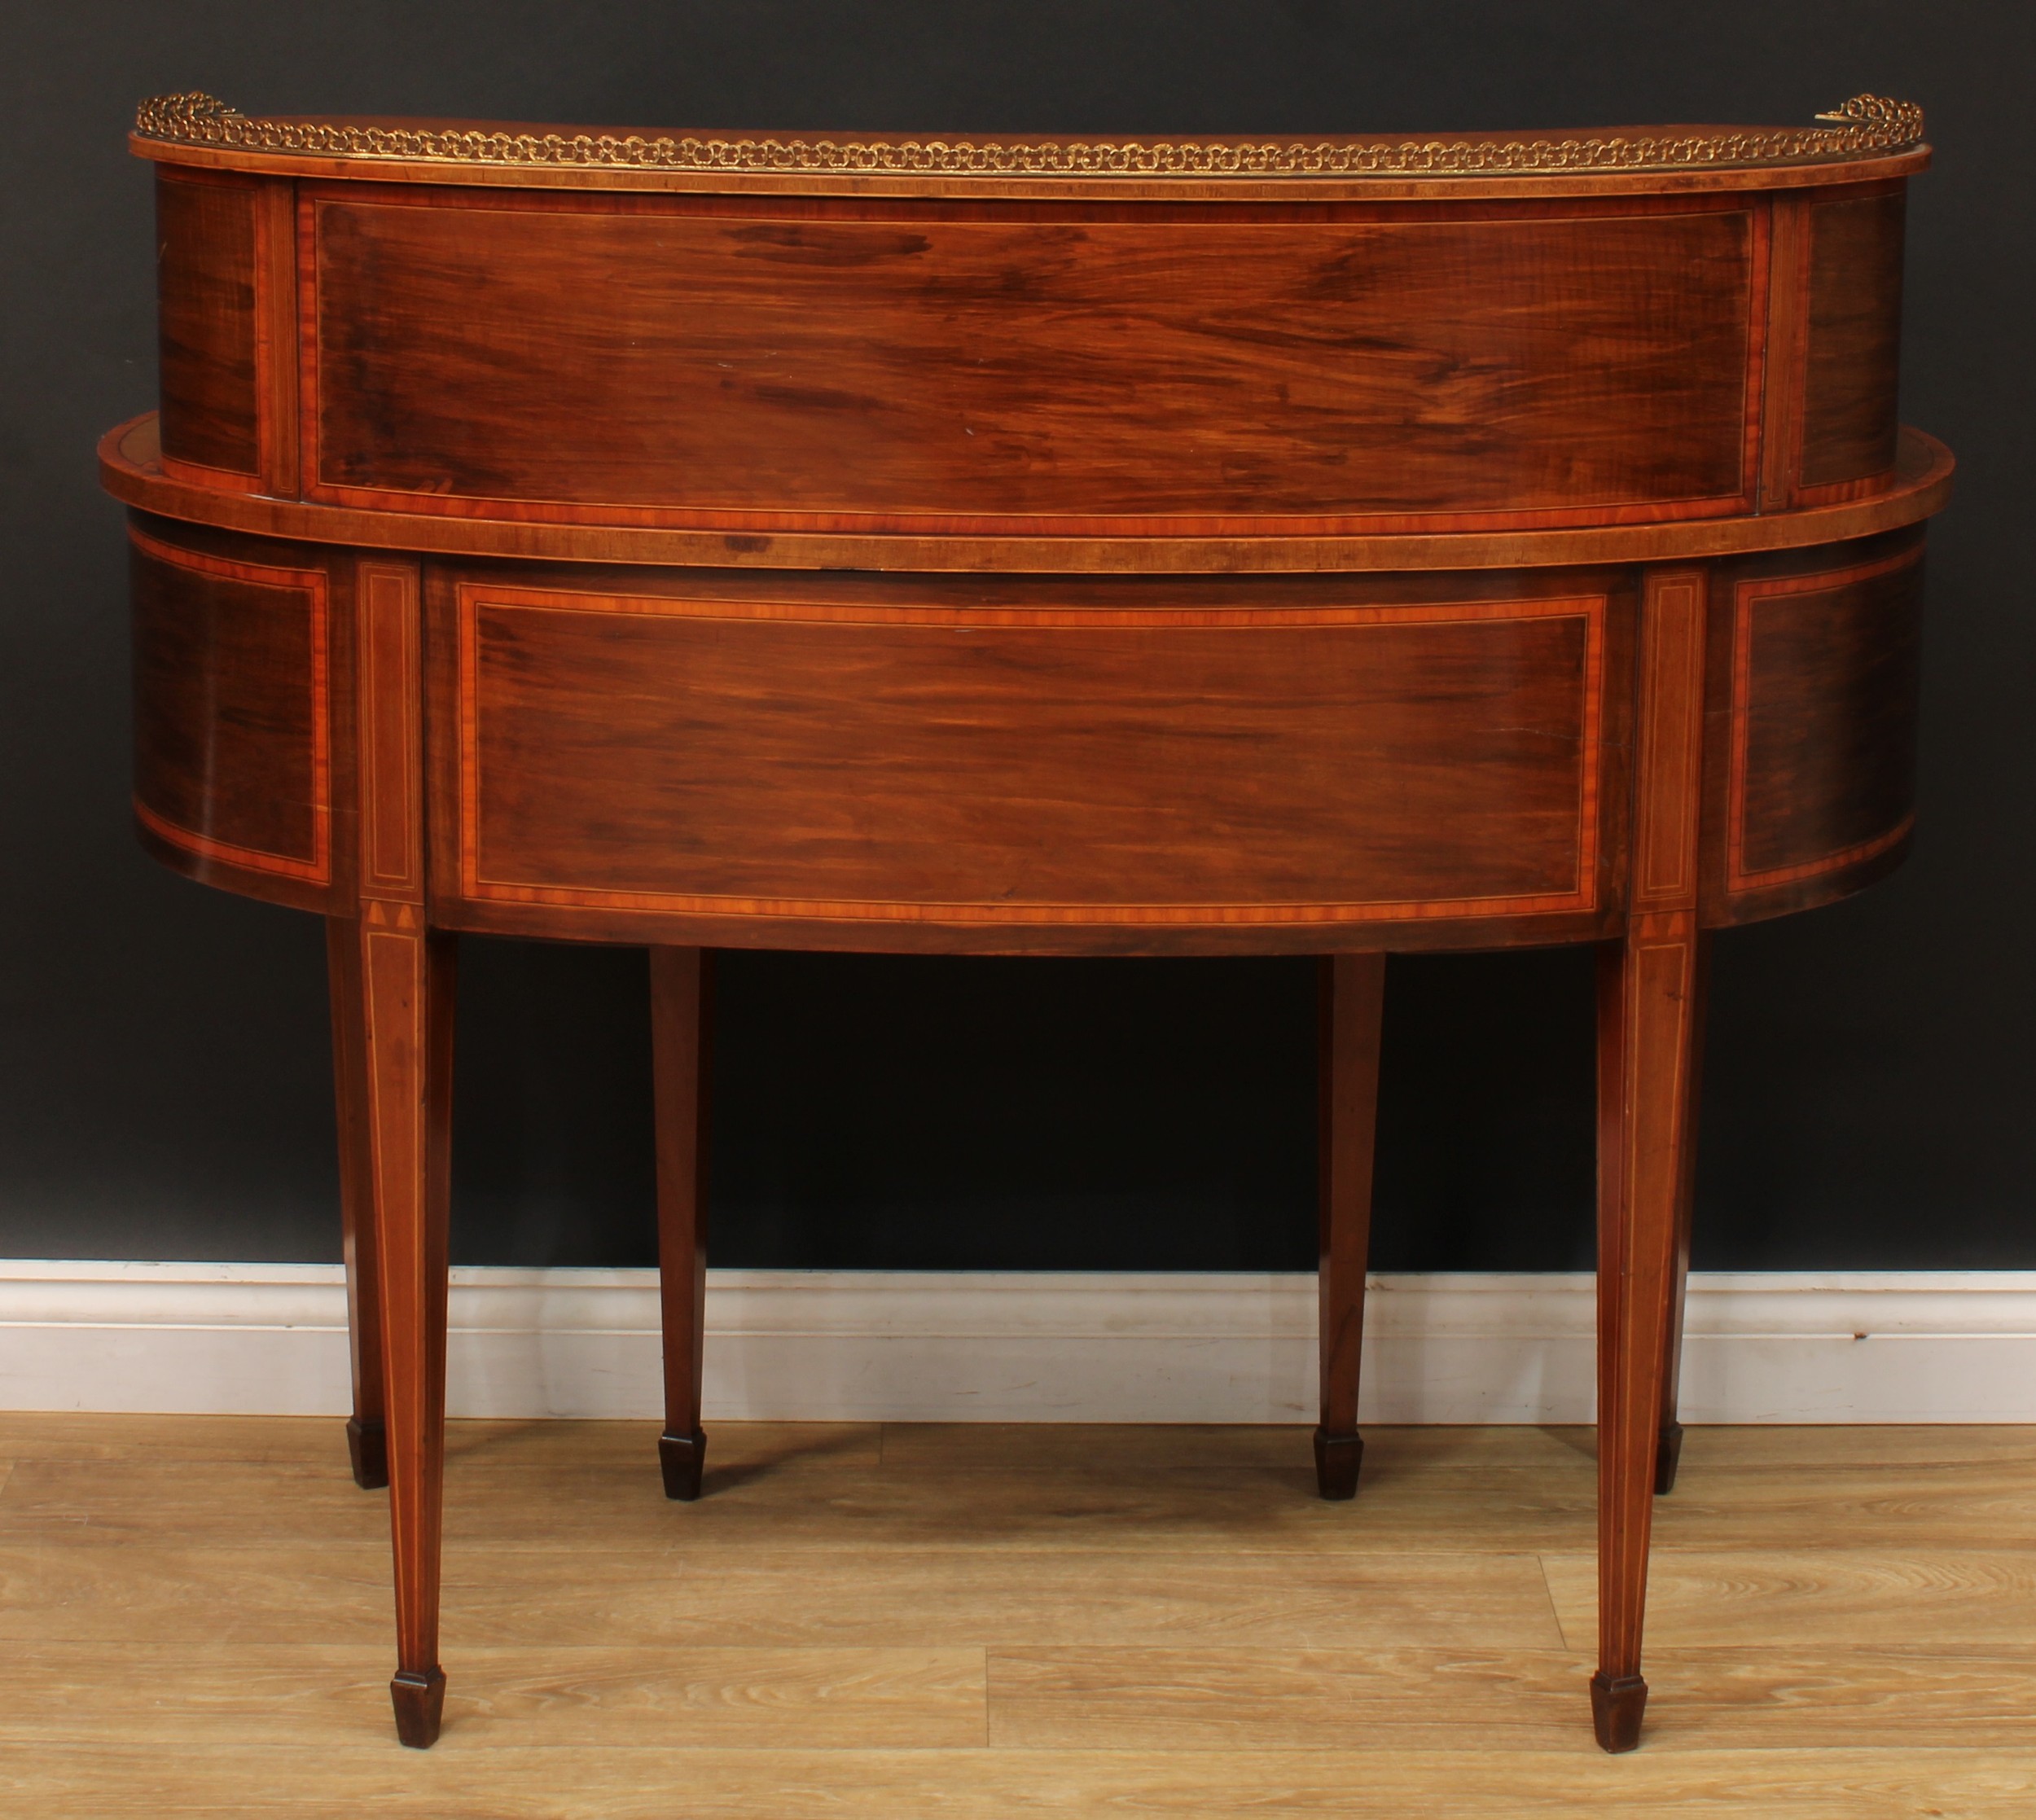 An Edwardian satinwood crossbanded kidney-shaped Carlton House type desk, shaped superstructure with - Image 6 of 6